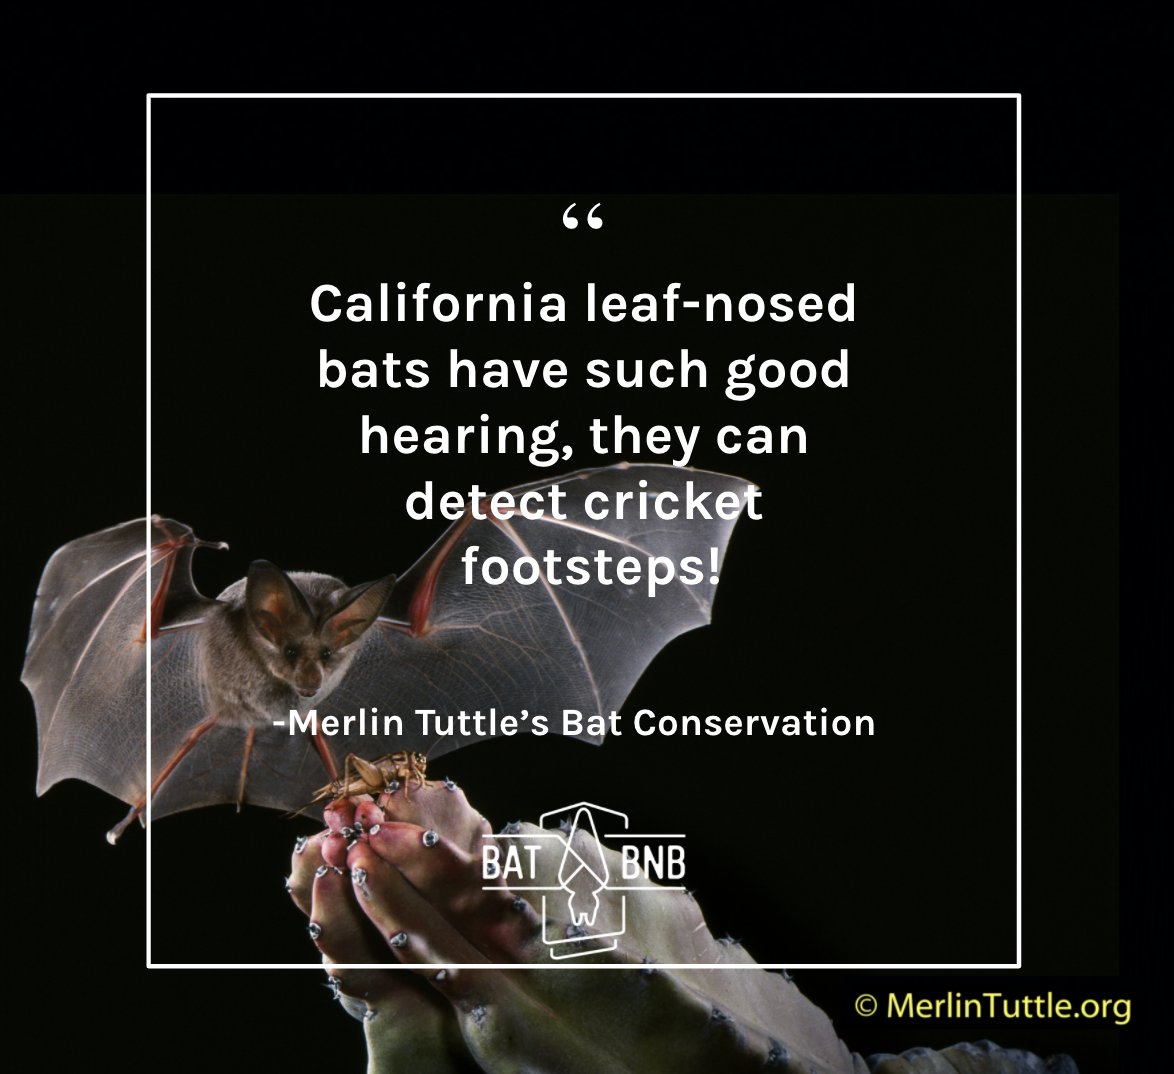 The abilities of #bats continually blow my mind!
California leaf-nosed bats are able to detect footsteps of crickets. 😱 What's your favorite fun #BatFact ?👇

📸@MerlinsBats 
#animalfacts #batsareawesome